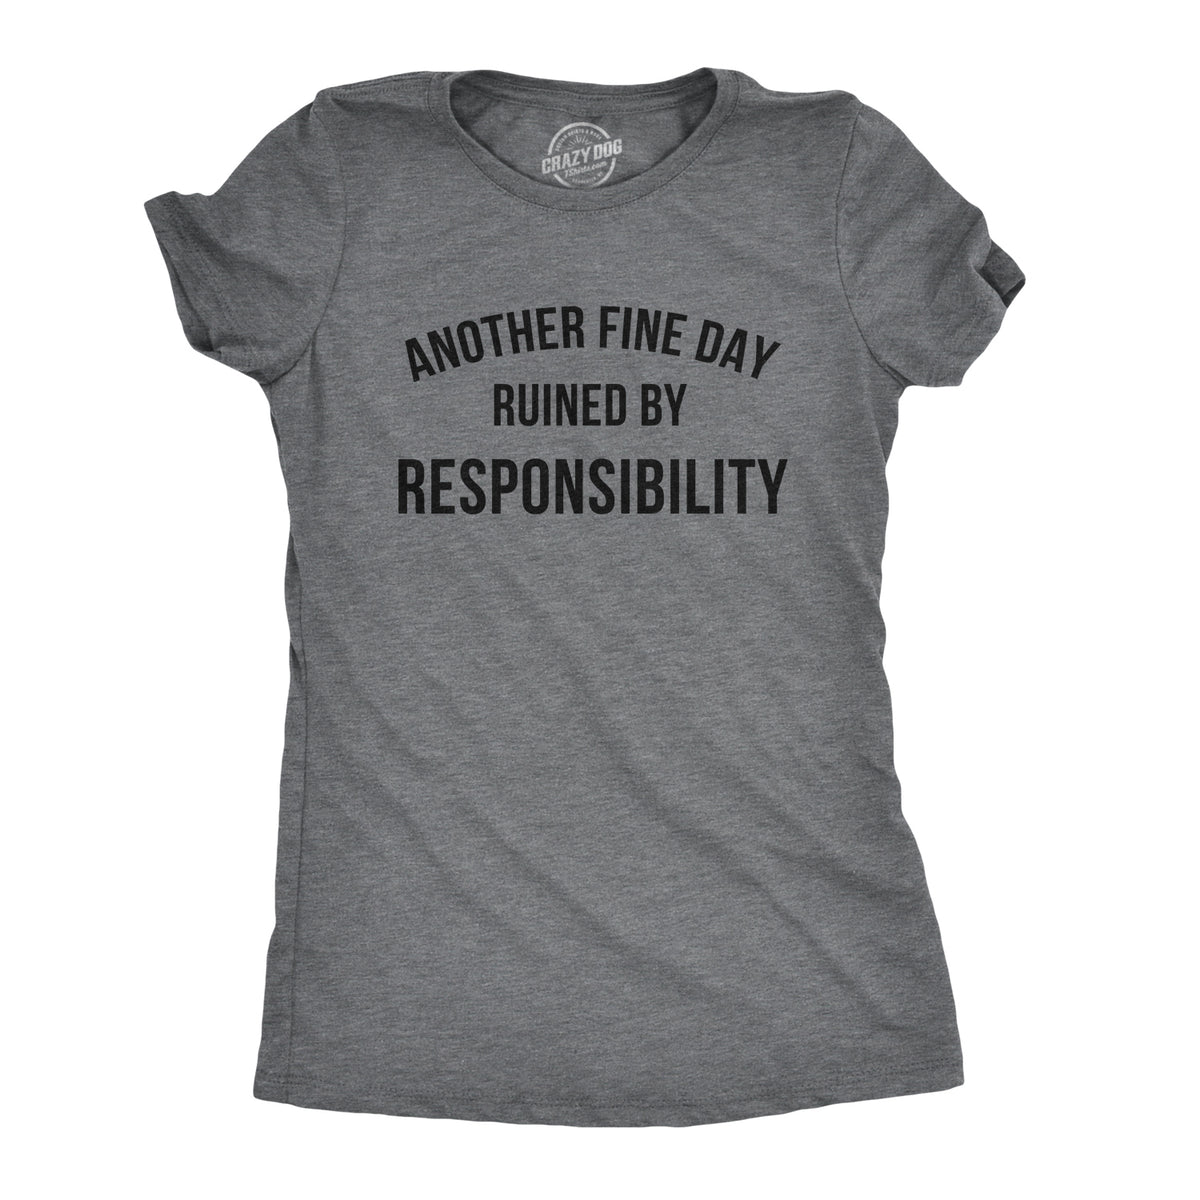 Funny Dark Heather Grey Another Fine Day Ruined By Responsibility Womens T Shirt Nerdy Tee